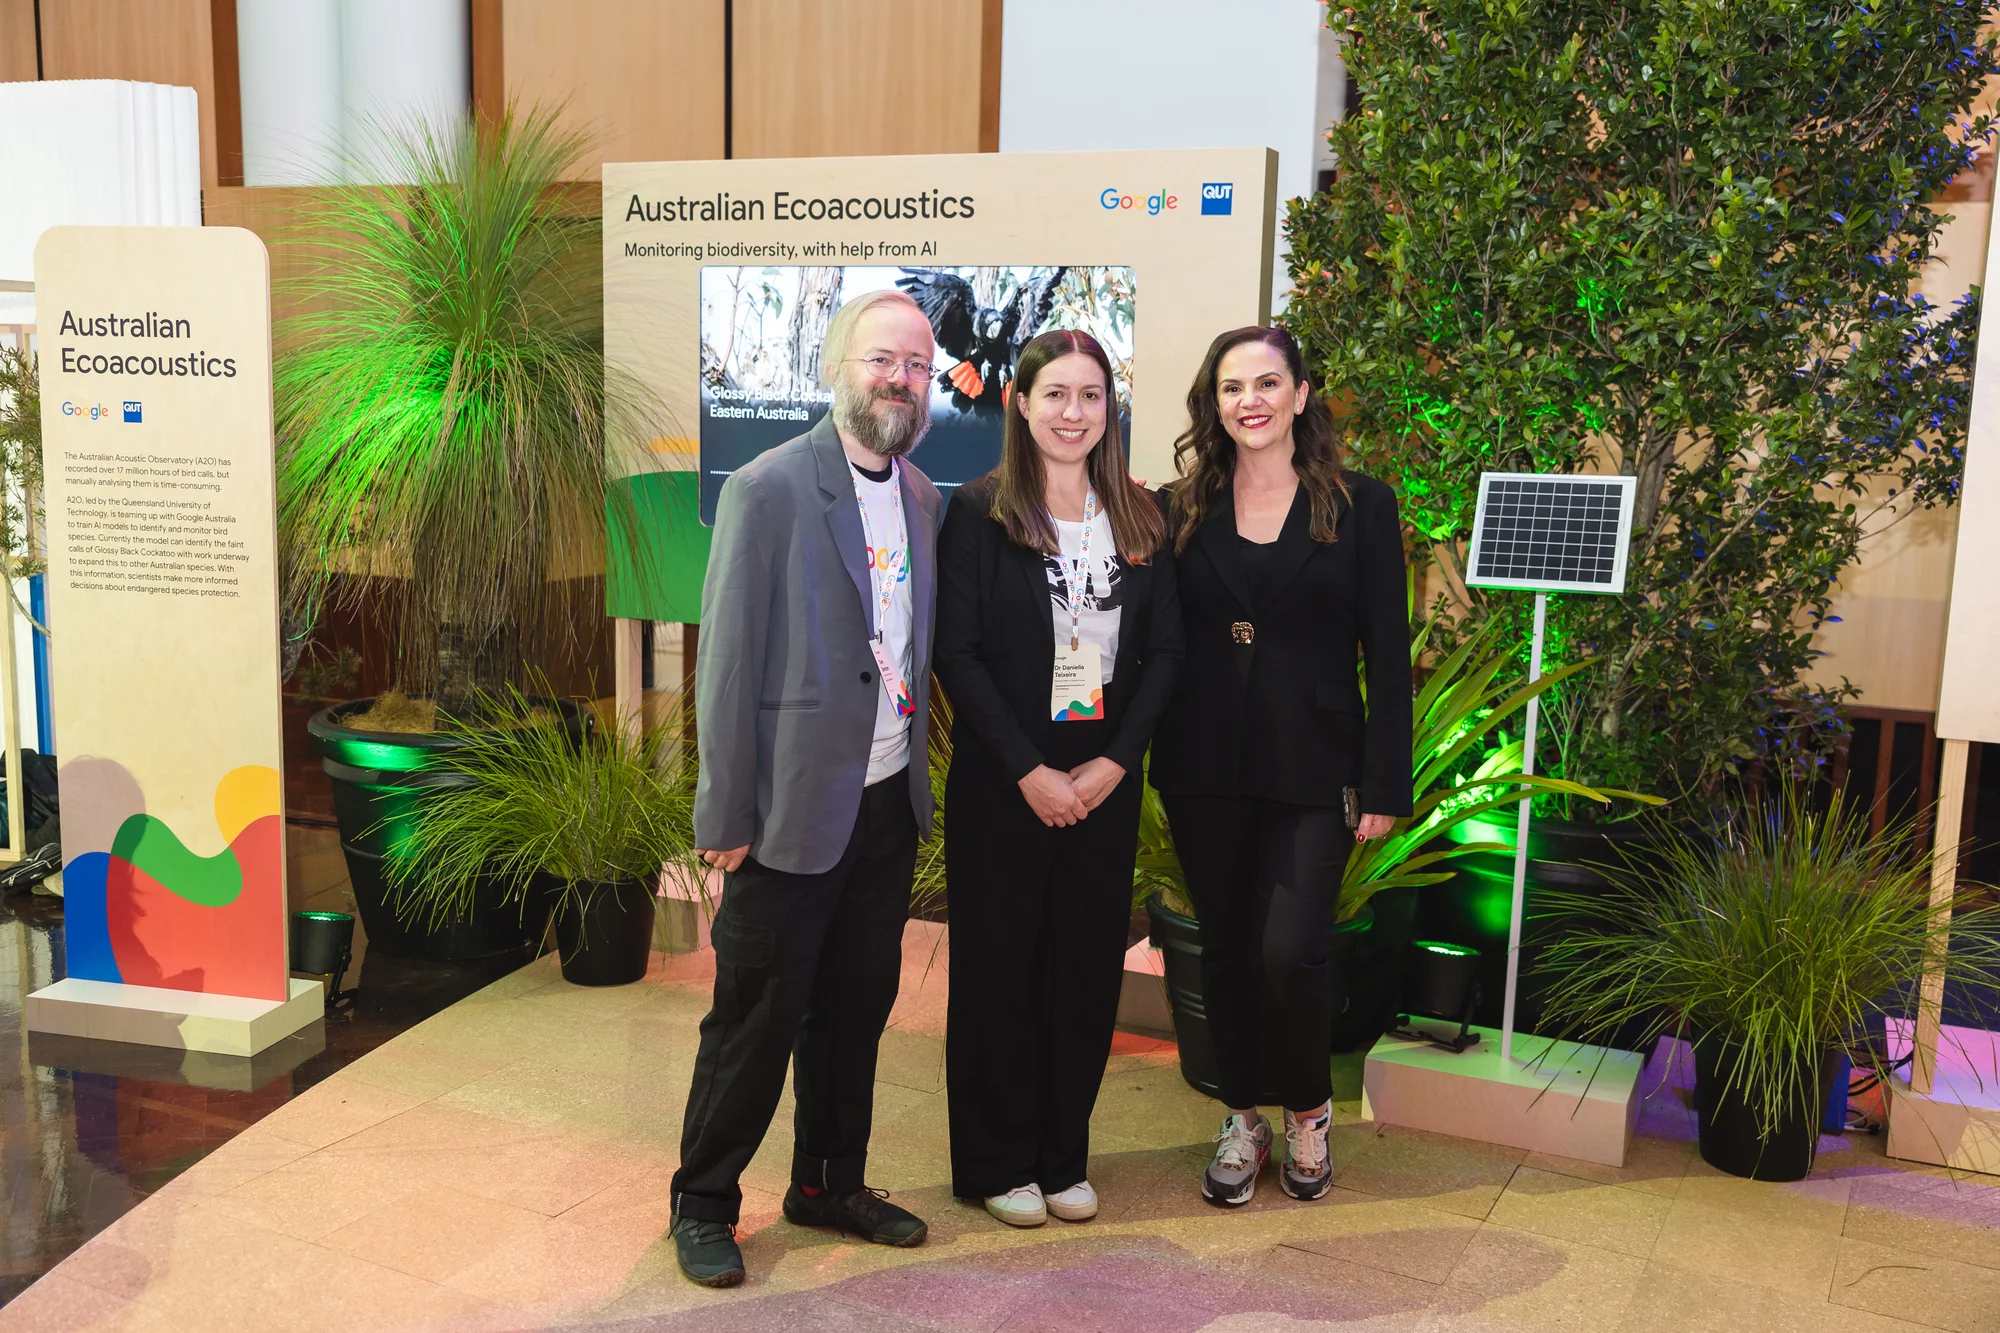 Tom Denton, Software Engineer, Google with Dr Daniella Teixeira, Research Fellow from QUT and Google Australia MD Mel Silva in front of an exhibit showcasing a new ecoacoustics partnership with QUT.